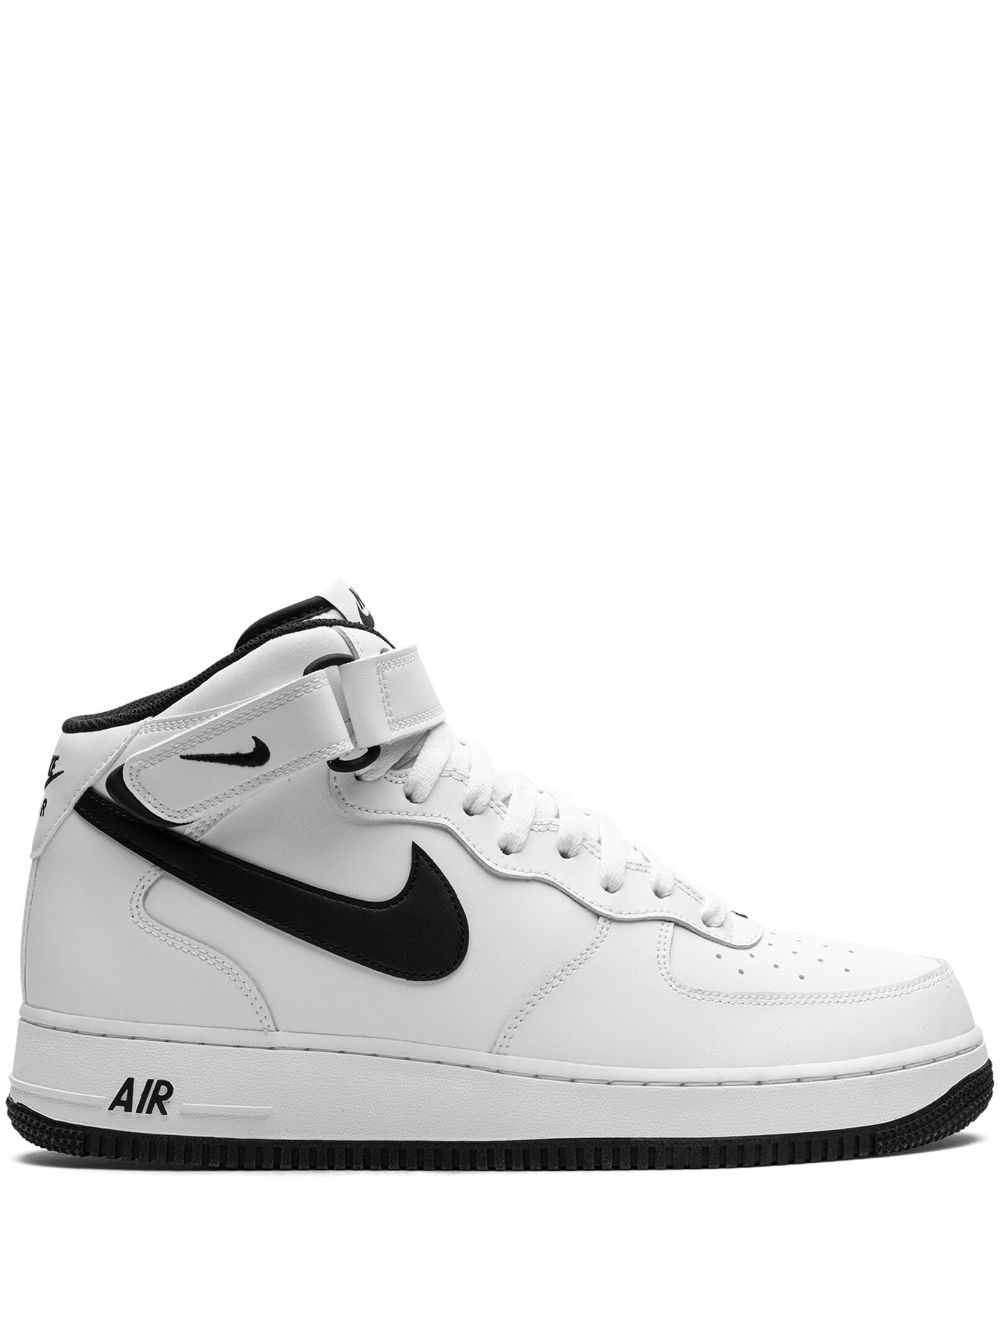 Air Force 1 Mid "White/Black" sneakers - 1